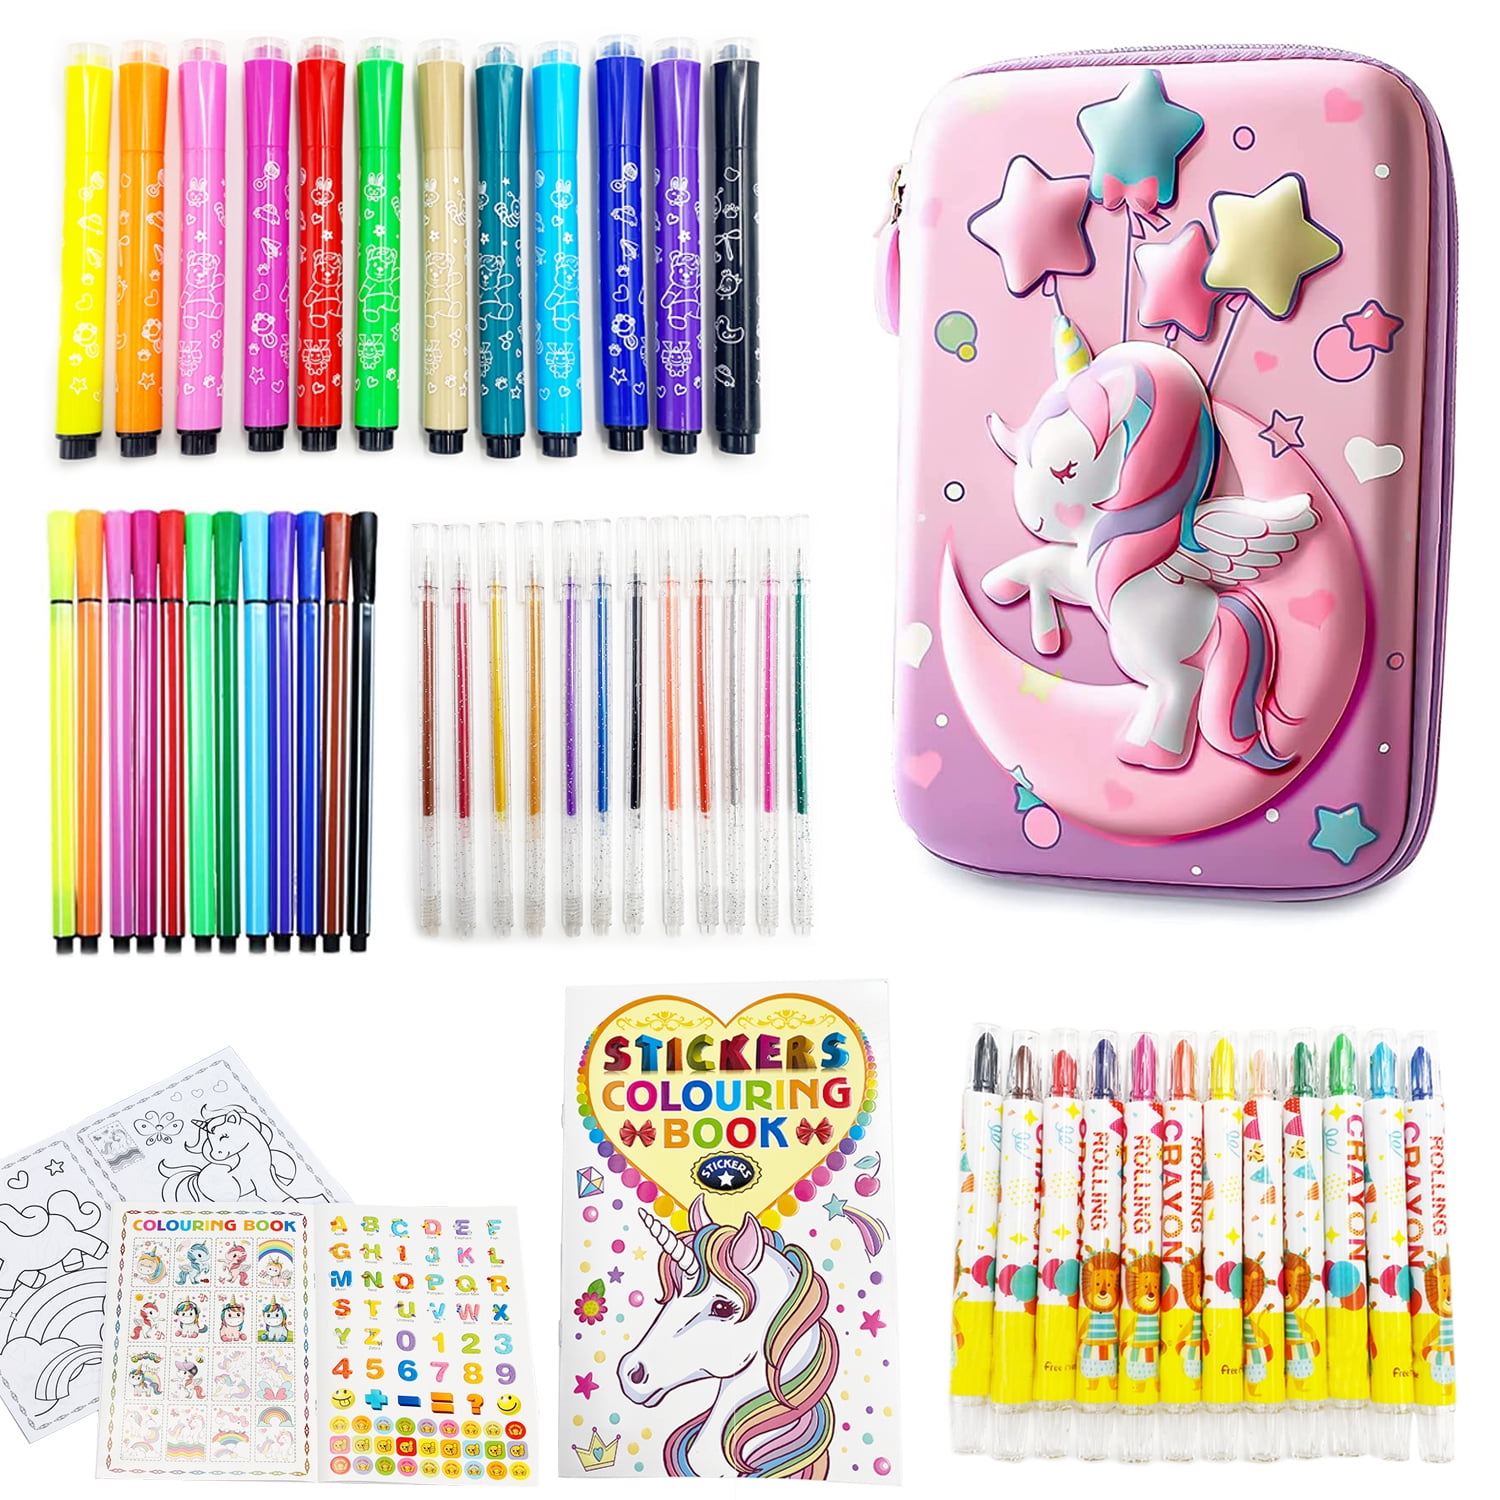 All In One Stationery Sets For Girls Unicorn Christmas Gifts Pocket  Included Wallet Purse Pencils Sharpener Eraser Ruller 6-In-1